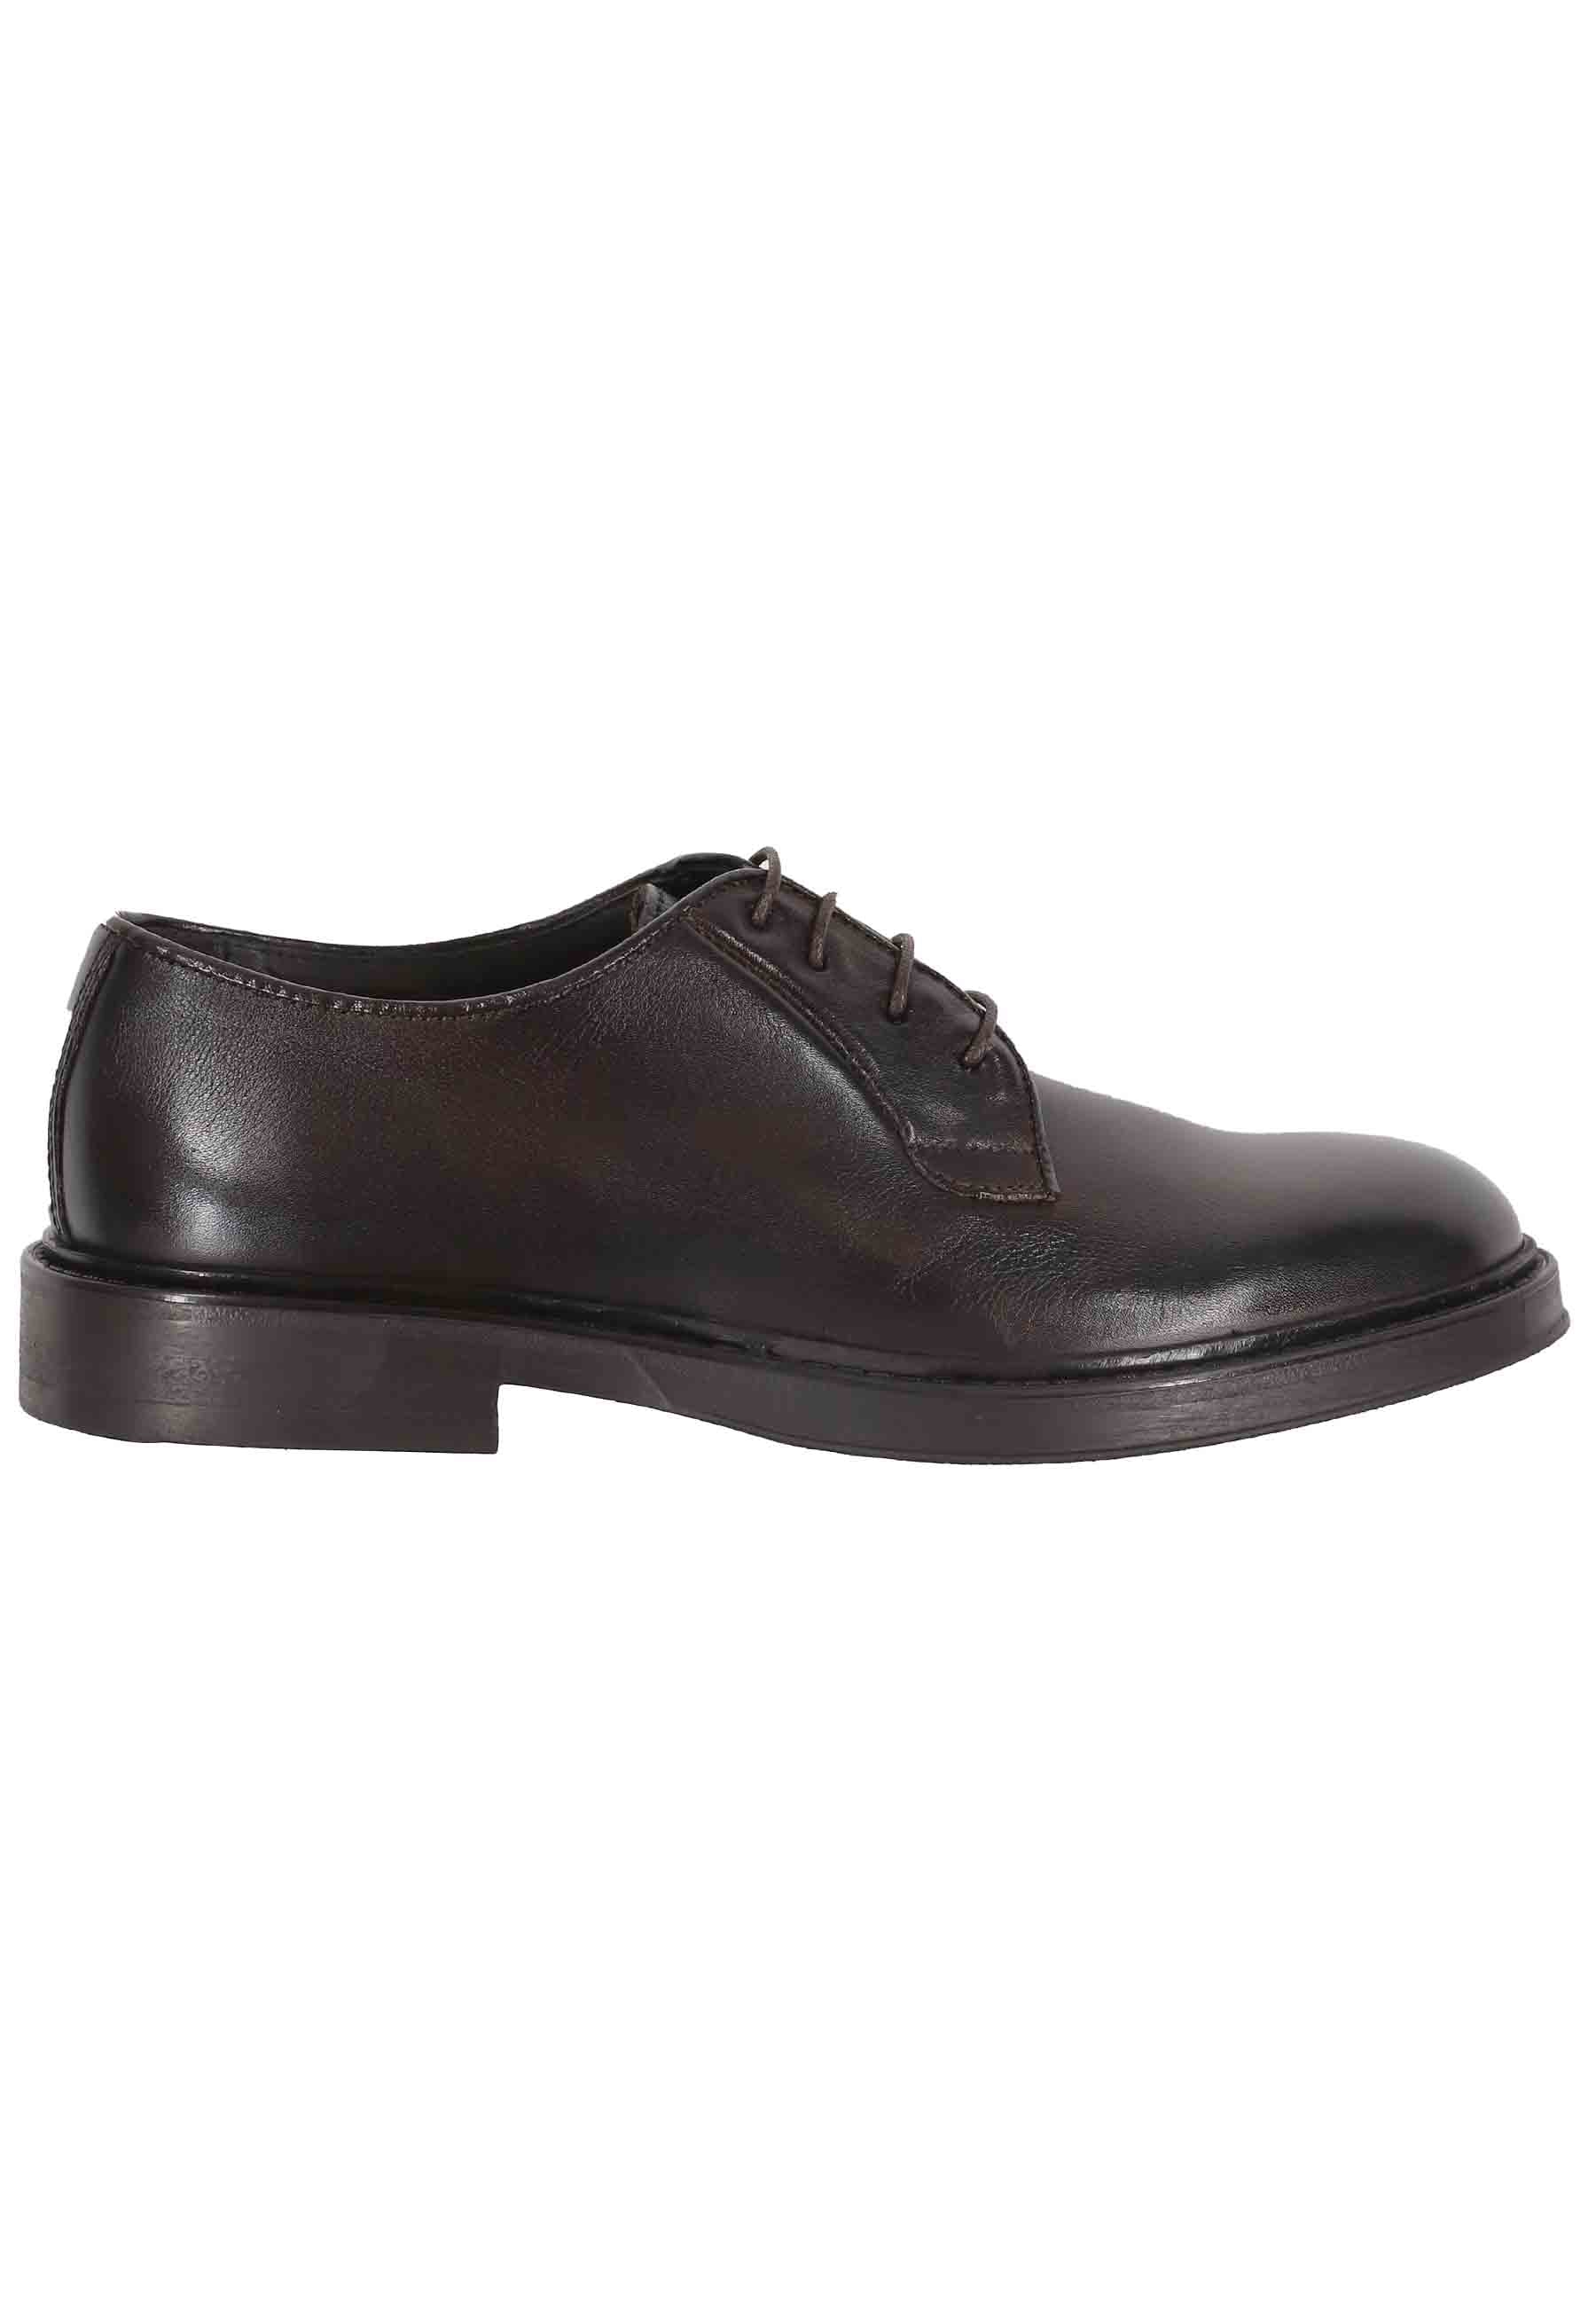 Men's lace-ups in dark brown leather with rubber sole